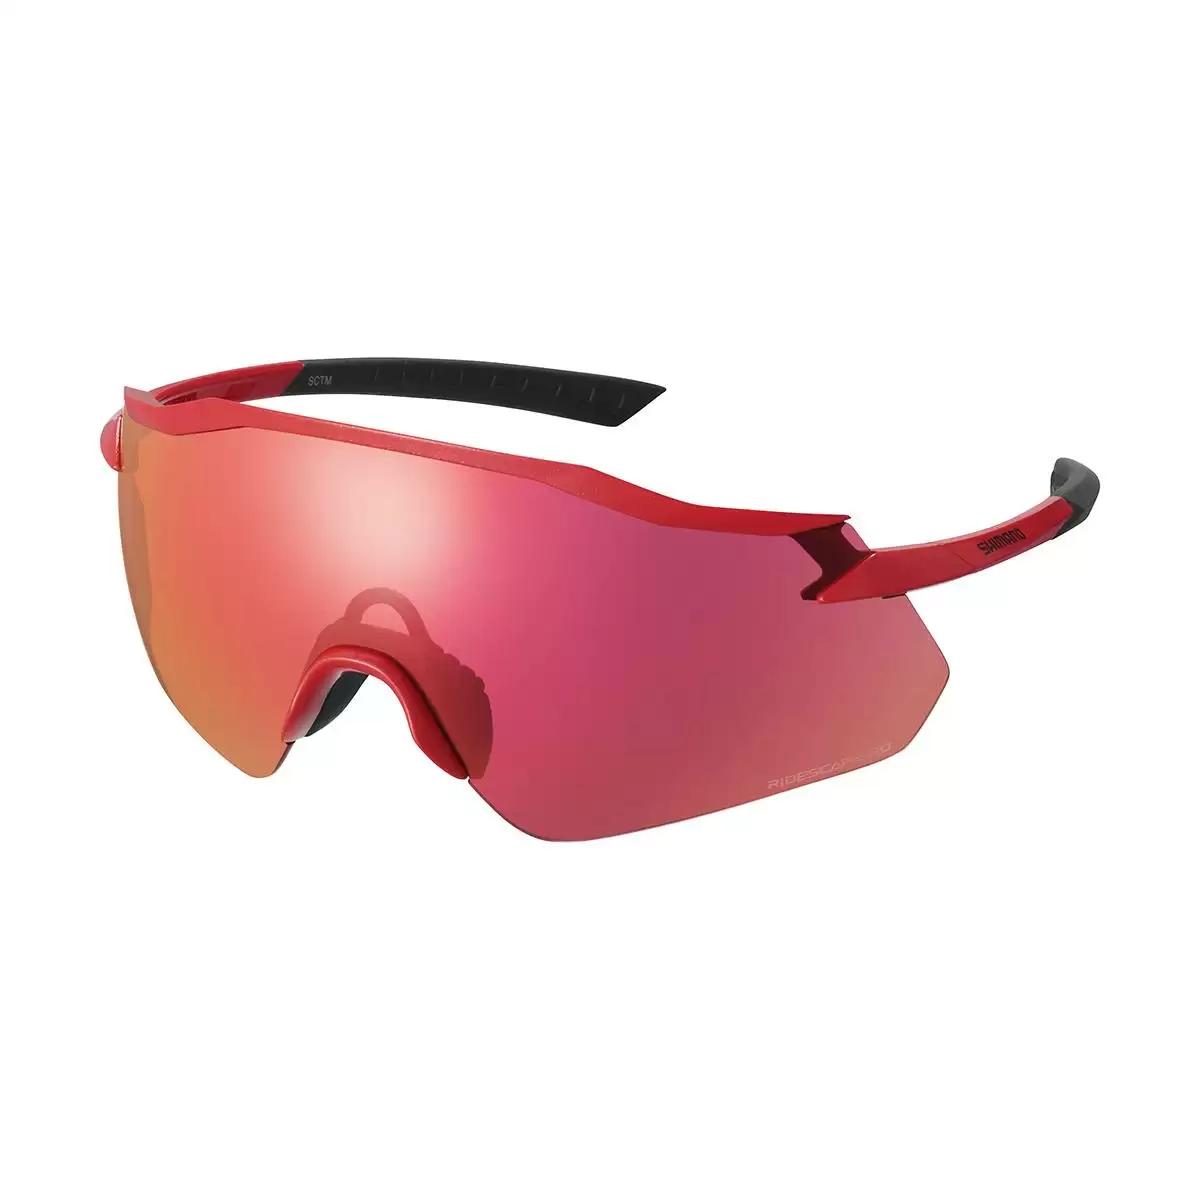 CE-EQNX4 Equinox Red Glasses Ridescape Road Lens - image